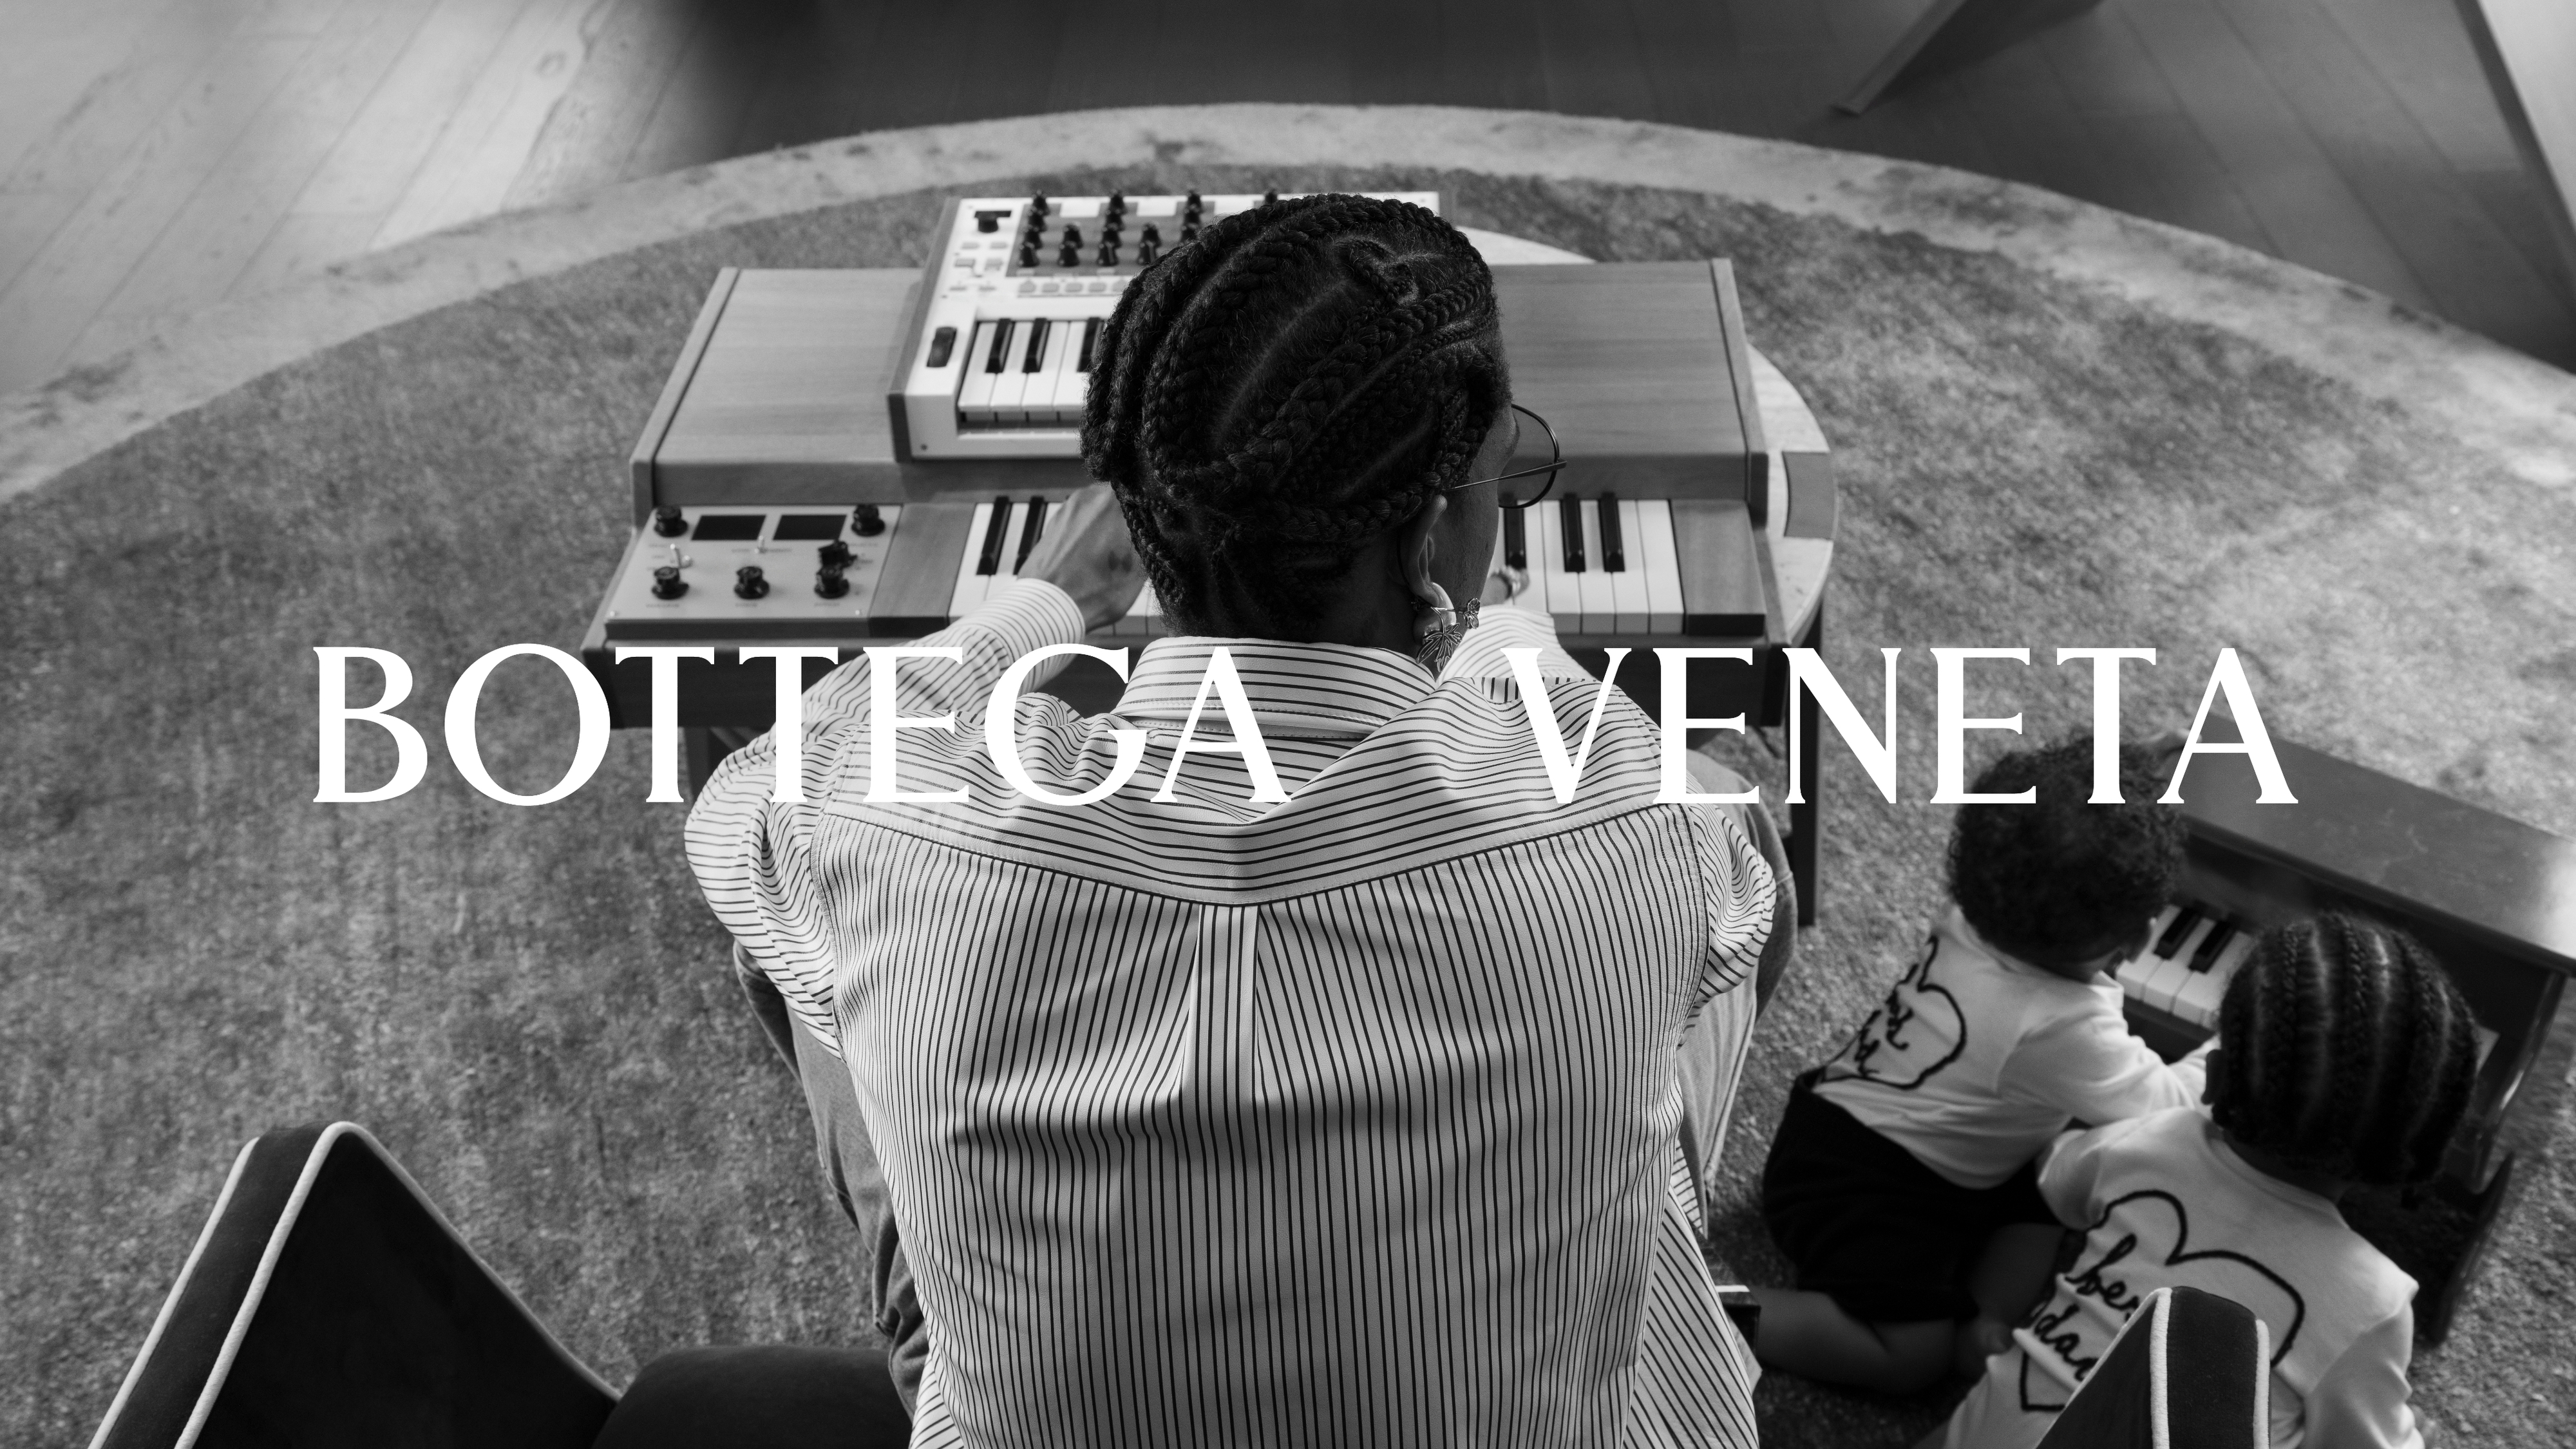 A person with braided hair and children are seated, viewed from behind, with text &#x27;Bottega Veneta&#x27; overlaying the image. A keyboard instrument is in front of them